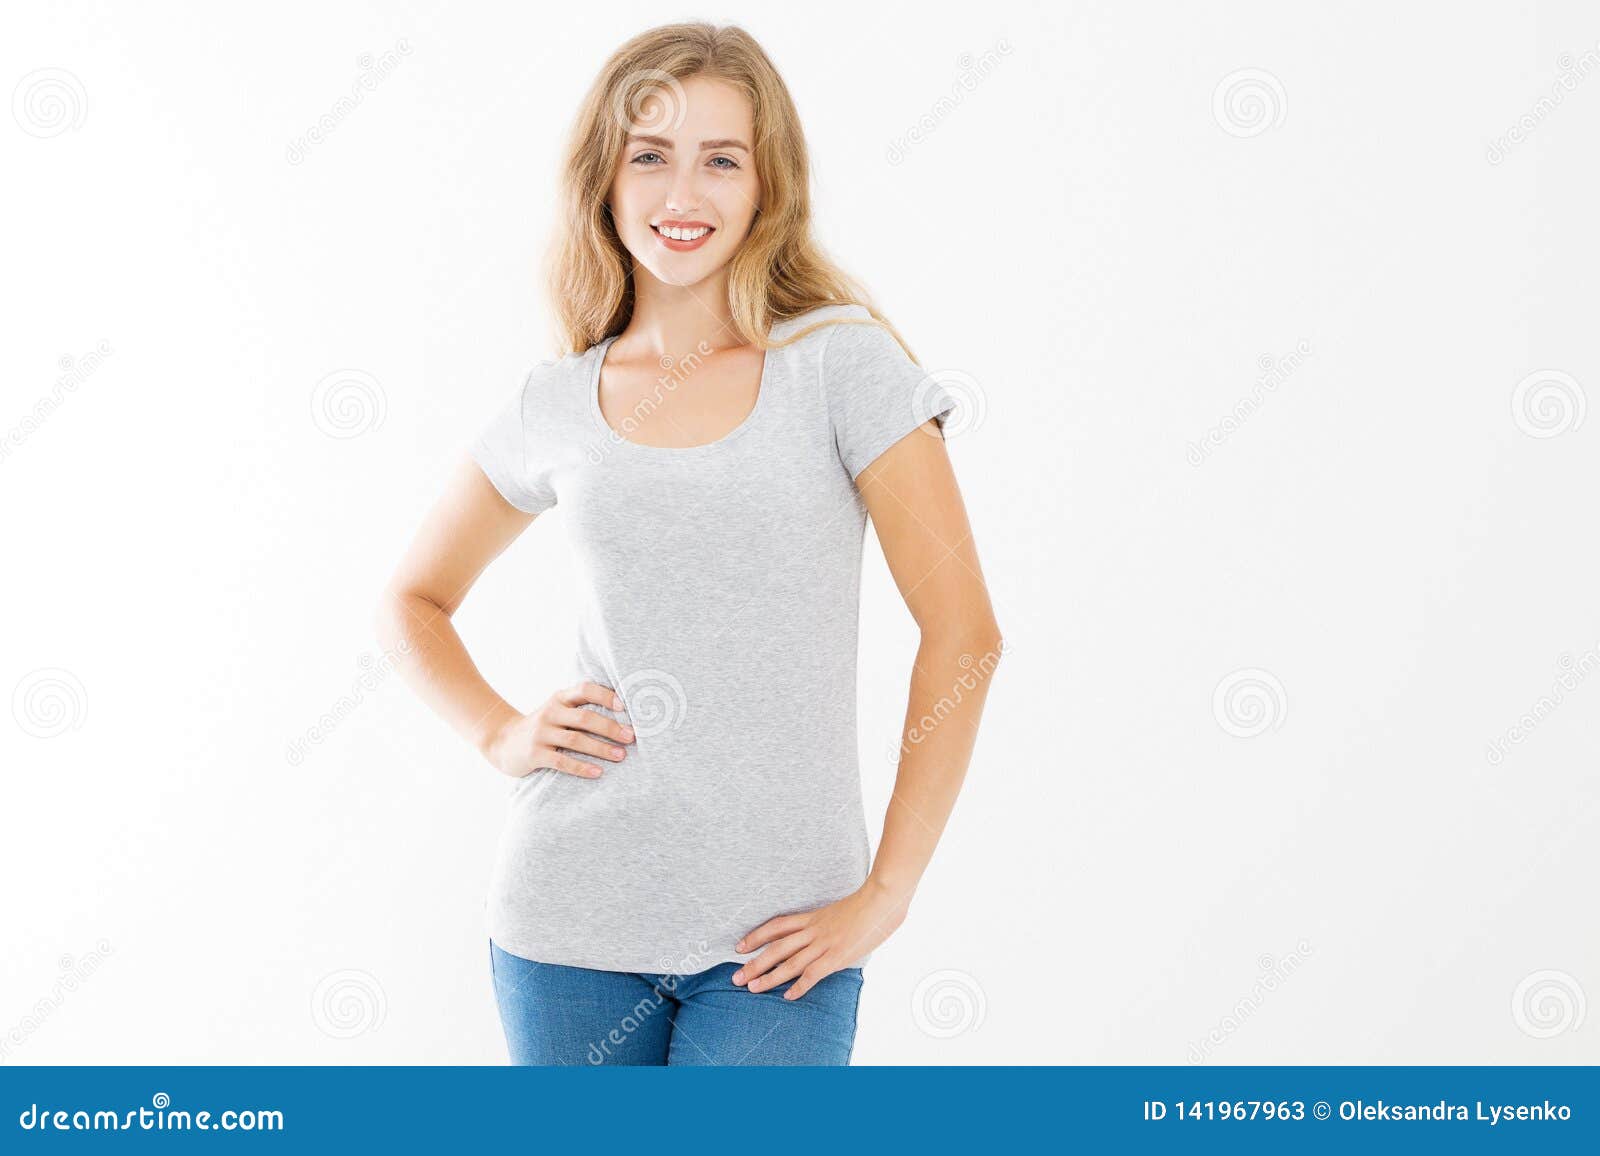 Young Blonde Woman with Fit Slim Body in Blank Template T Shirt and ...